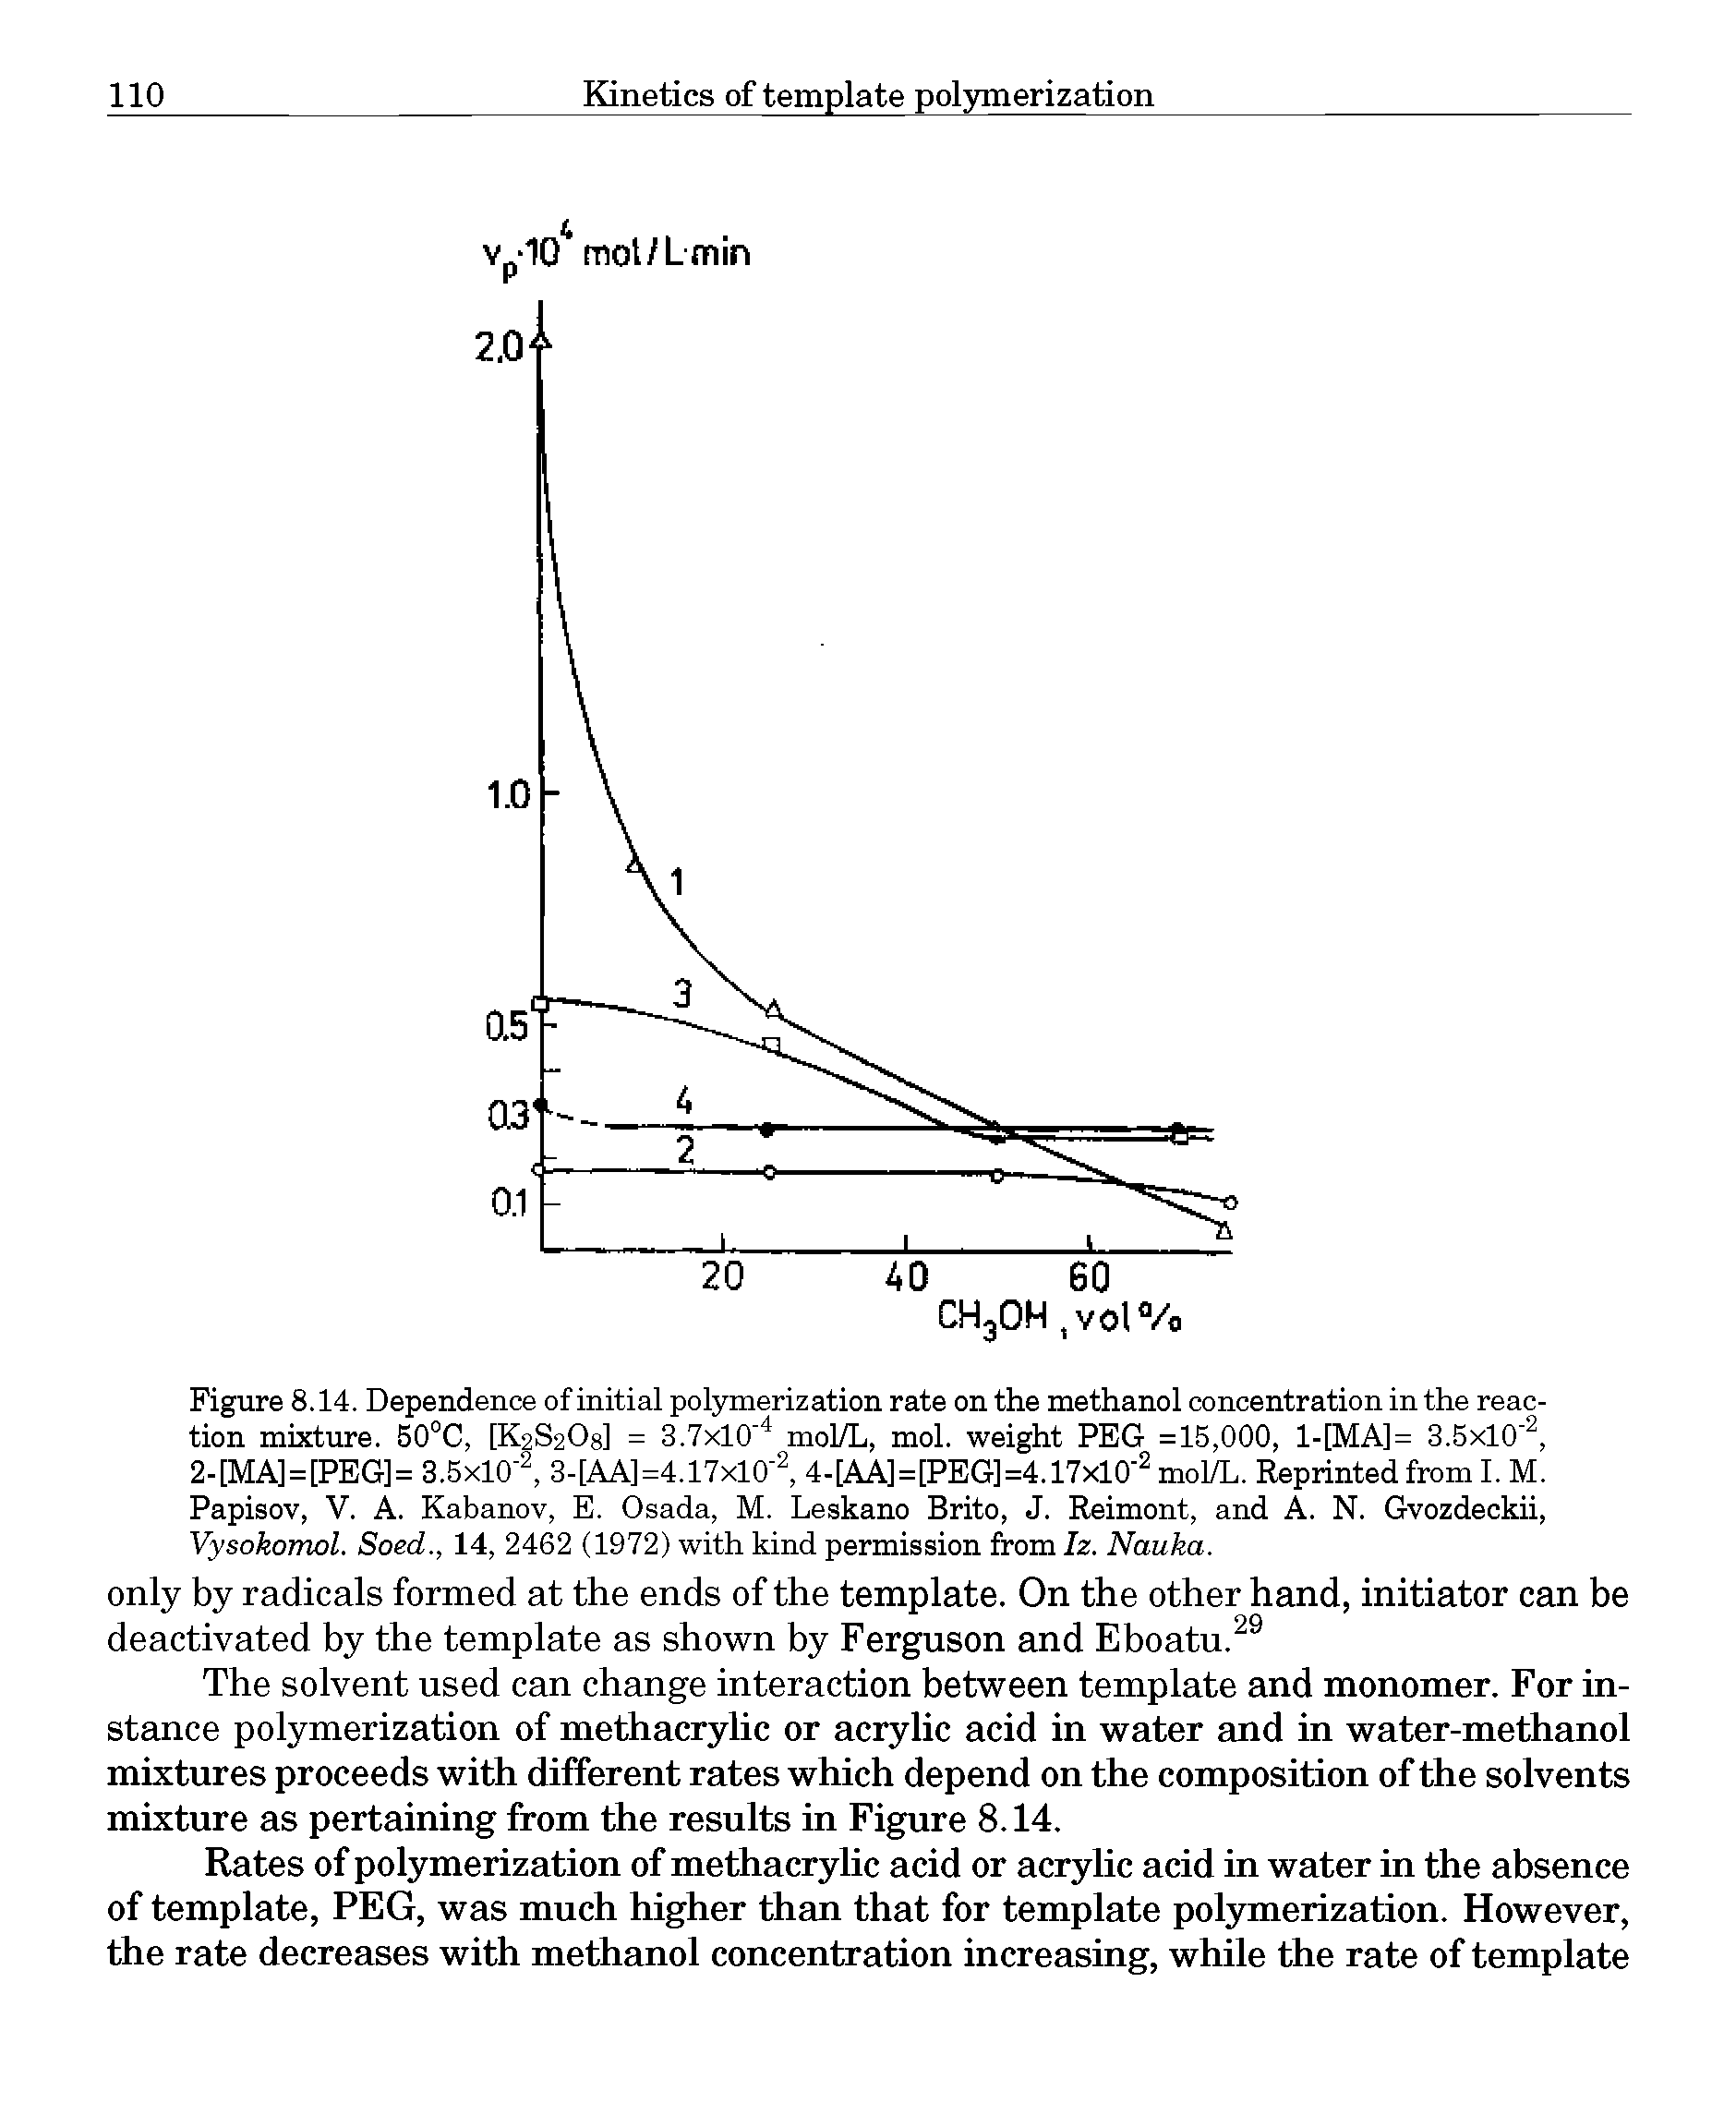 Figure 8.14. Dependence of initial polymerization rate on the methanol concentration in the reaction mixture. B0°C, [K2S2O8] = 3.7x10 mol/L, mol. weight PEG =15,000, 1-[MA]= 3.5x10, 2-[MA] = [PEG]= 3.5x10 3-[AA]=4.17xlO 4-[AA]=[PEG]=4.17xlO mol/L. Reprinted from I. M. Papisov, V. A. Kabanov, E. Osada, M. Leskano Brito, J. Reimont, and A. N. Gvozdeckii, Vysokomol. Soed., 14, 2462 (1972) with kind permission from Iz. Nauka.